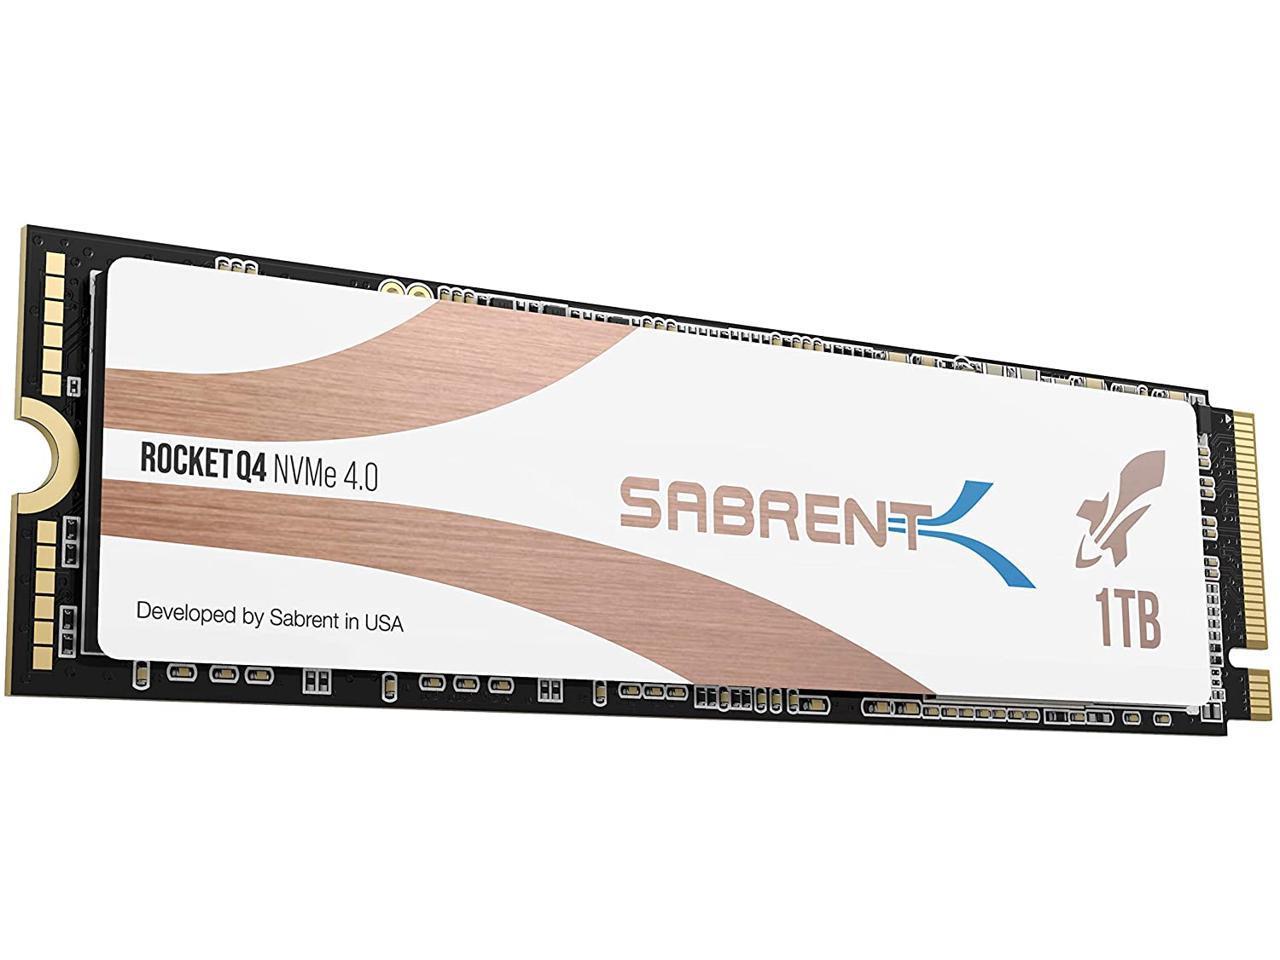 1TB Sabrent Rocket Q4 NVMe PCIe SSD for $127.99 Shipped